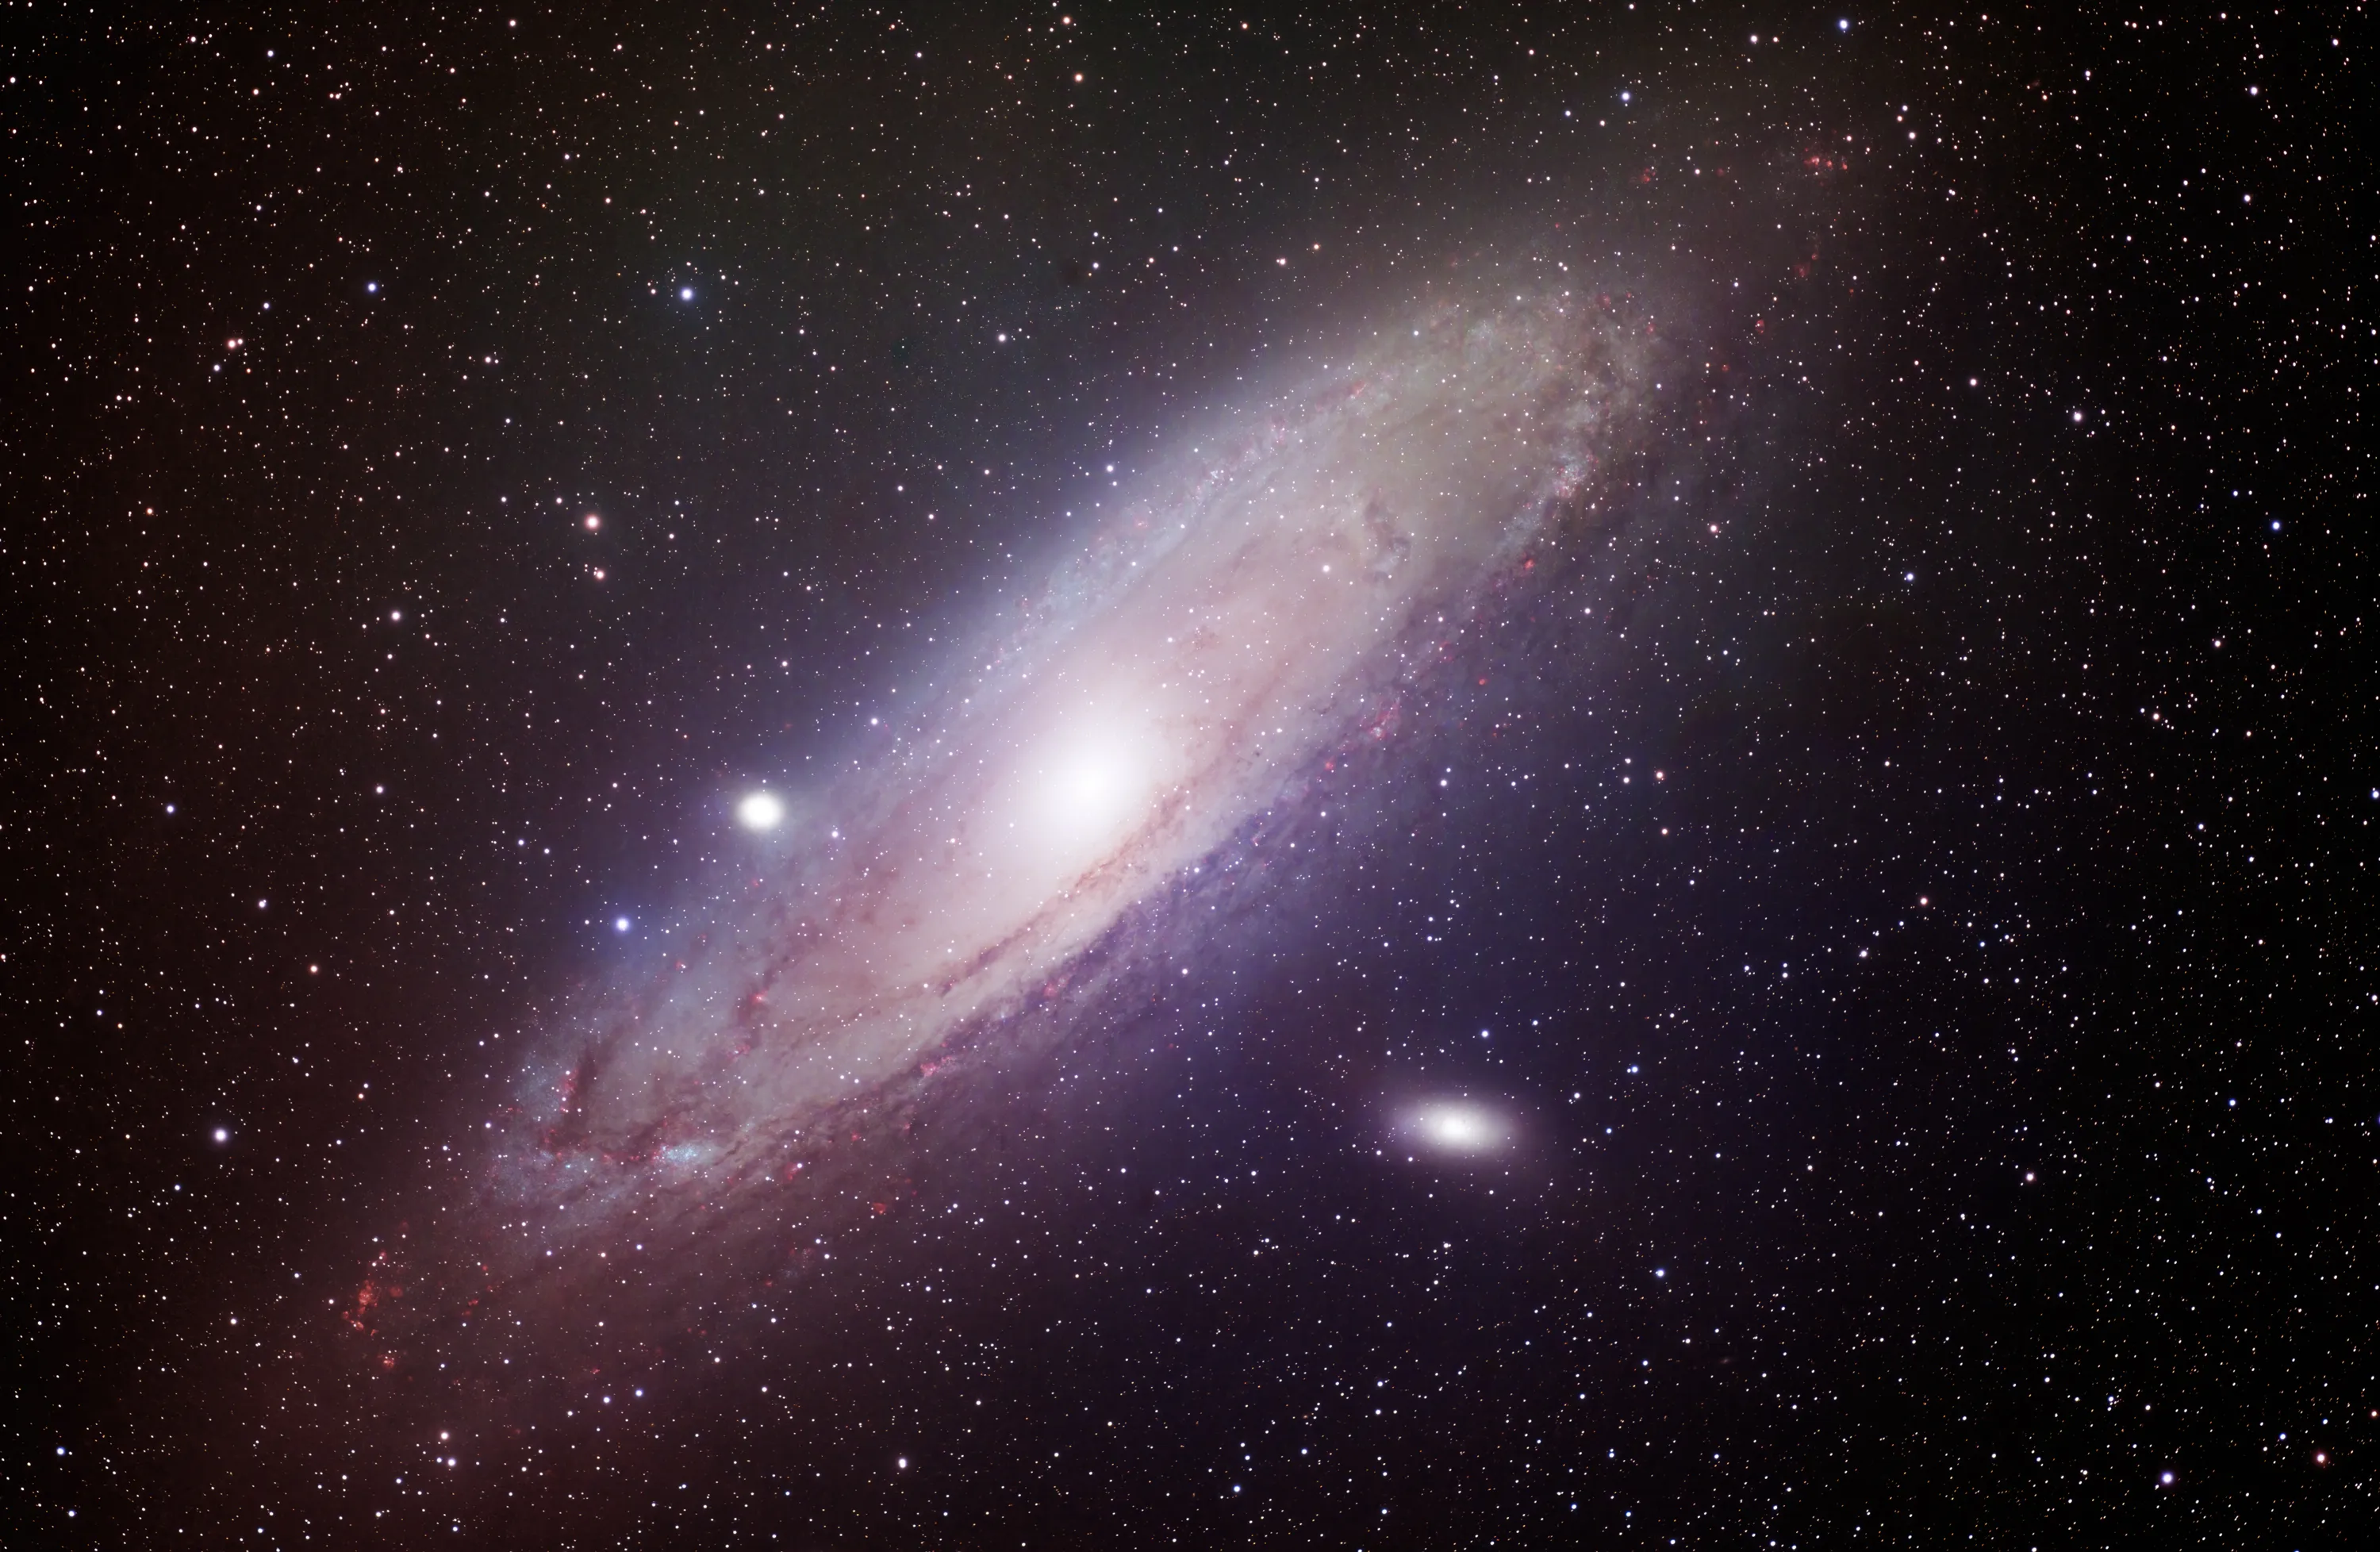 Photographing M31 Andromeda galaxy with the Askar FRA600 and ZWO ASI6200MM